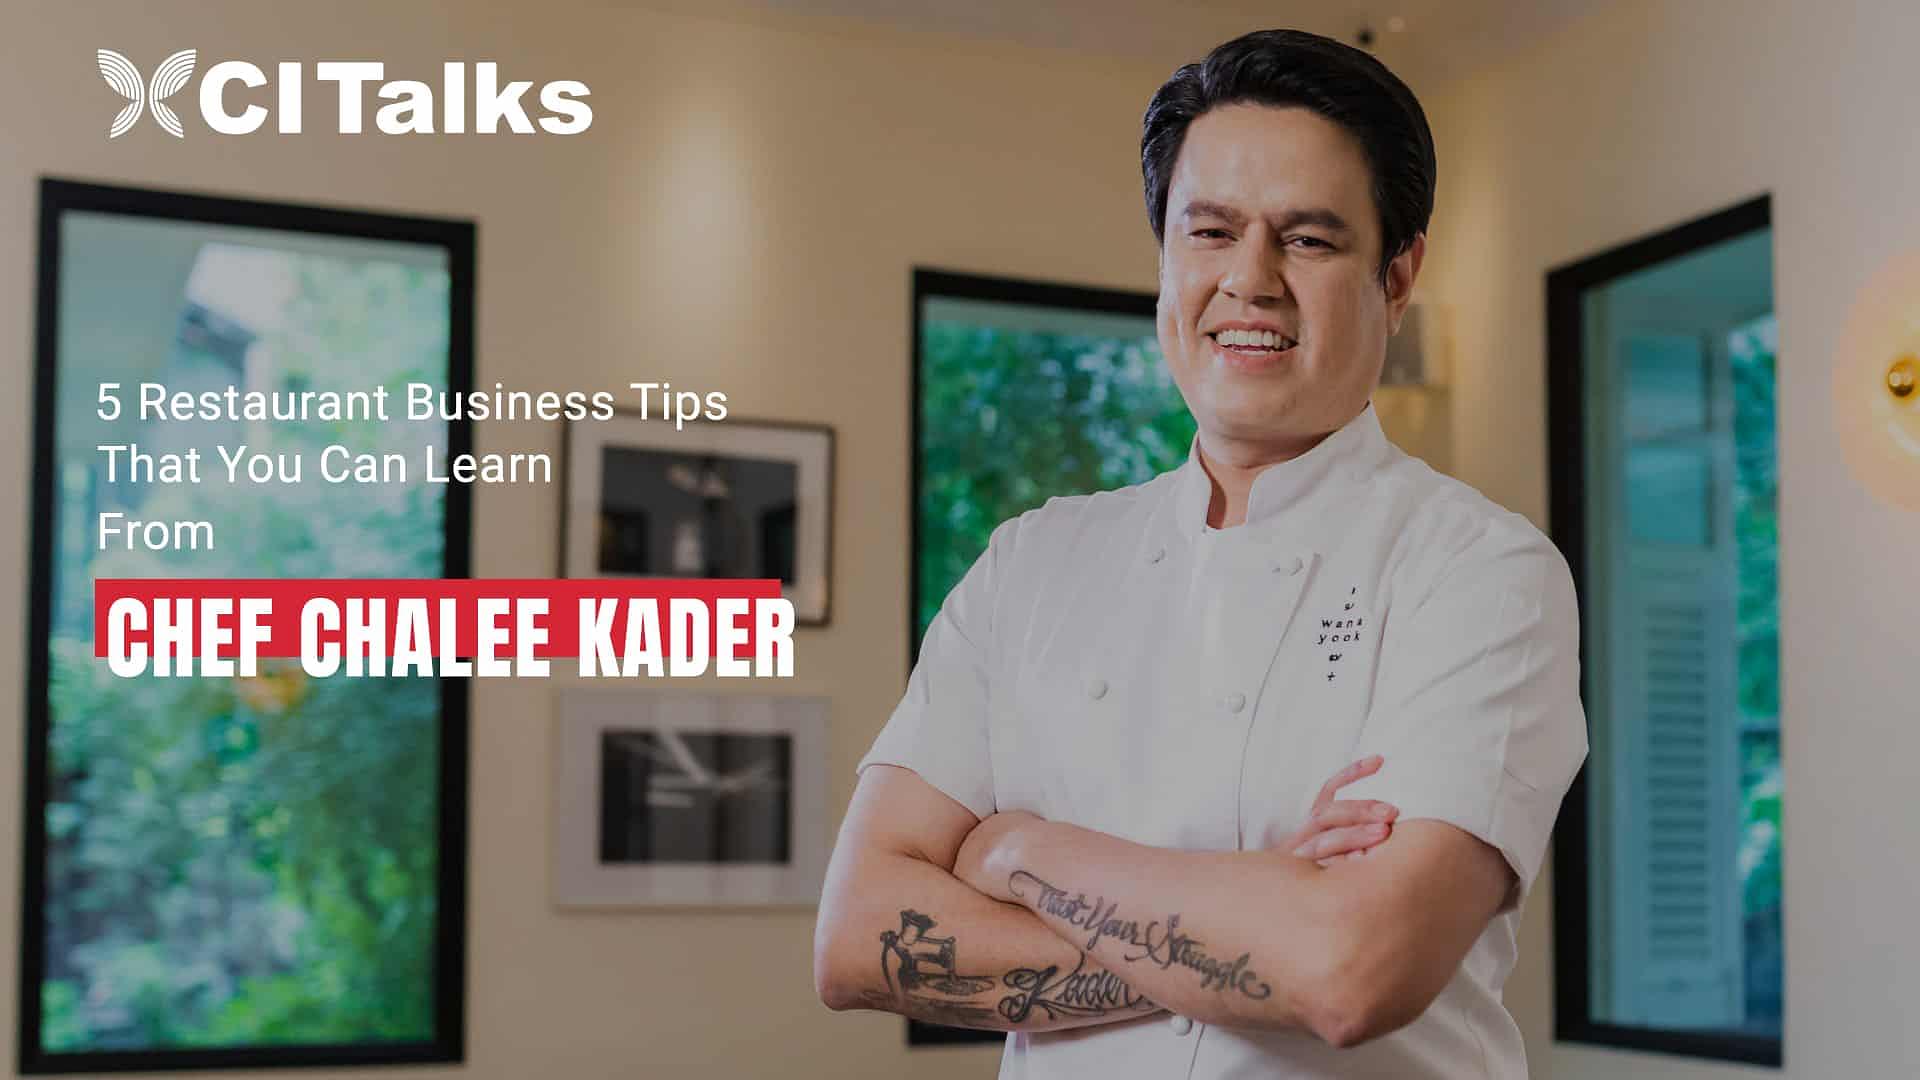 Five Restaurant Business Tips That You Can Learn From Chef Chalee Kader